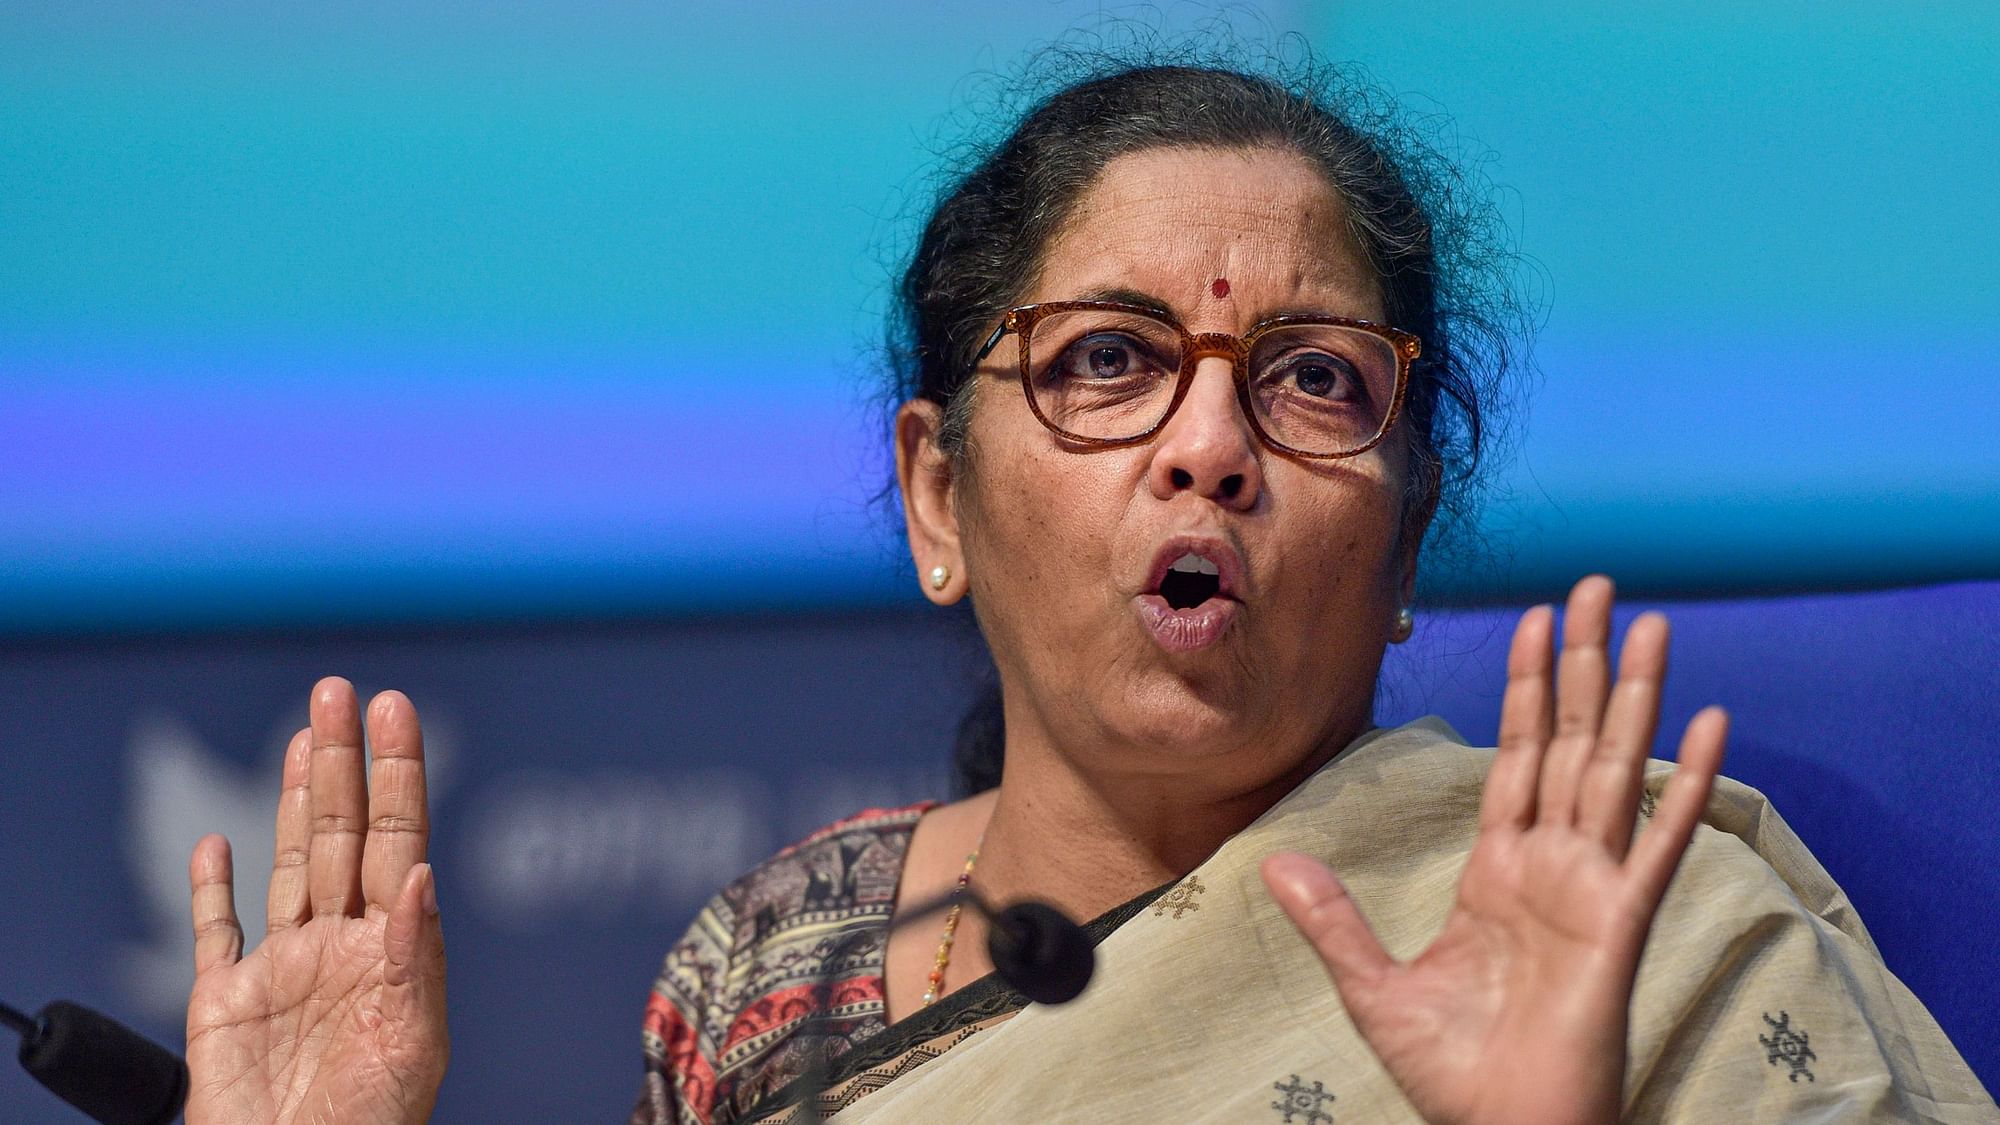 Finance Minister Nirmala Sitharaman on Sunday, 17 May will announce the last tranche of the economic package under the <a href="https://www.thequint.com/news/india/prime-minister-narendra-modi-address-to-nation-coronavirus-covid-19-updates">Atmanirbhar Bharat Abhiyan</a> <br>